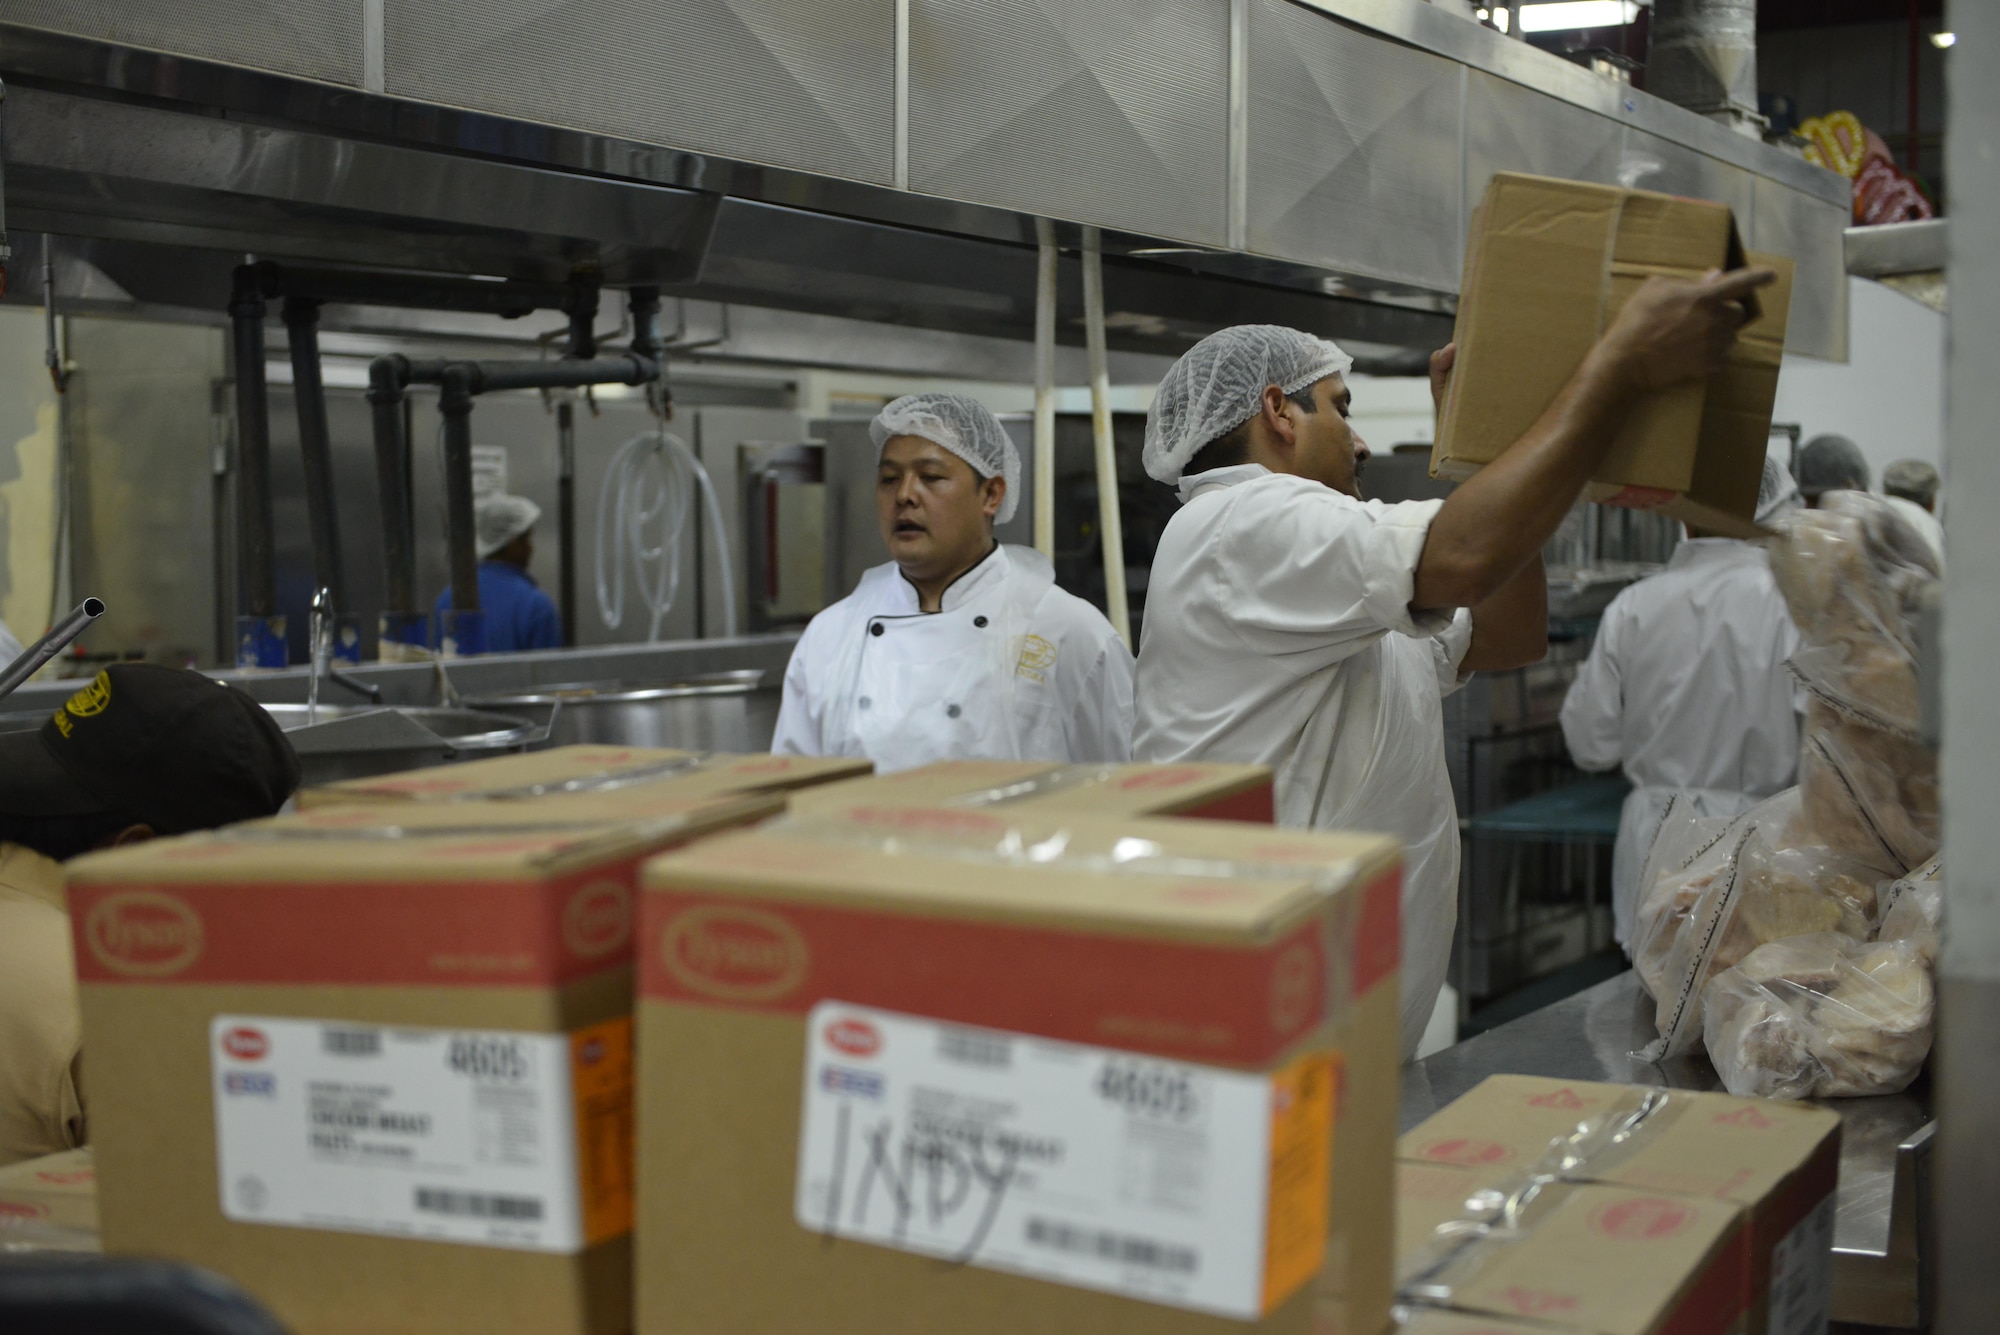 Dining facility cooks unpack a pallet of frozen chicken to start preparing for the dinner menu at the Independence Dinning Facility at Al Udeid Air Base, Qatar July 21, 2015. On an average day, 7,000 deployed members consume at least one pallet of chicken per dining facility here at Al Udeid.  (U.S. Air Force photo/Staff Sgt. Alexandre Montes)